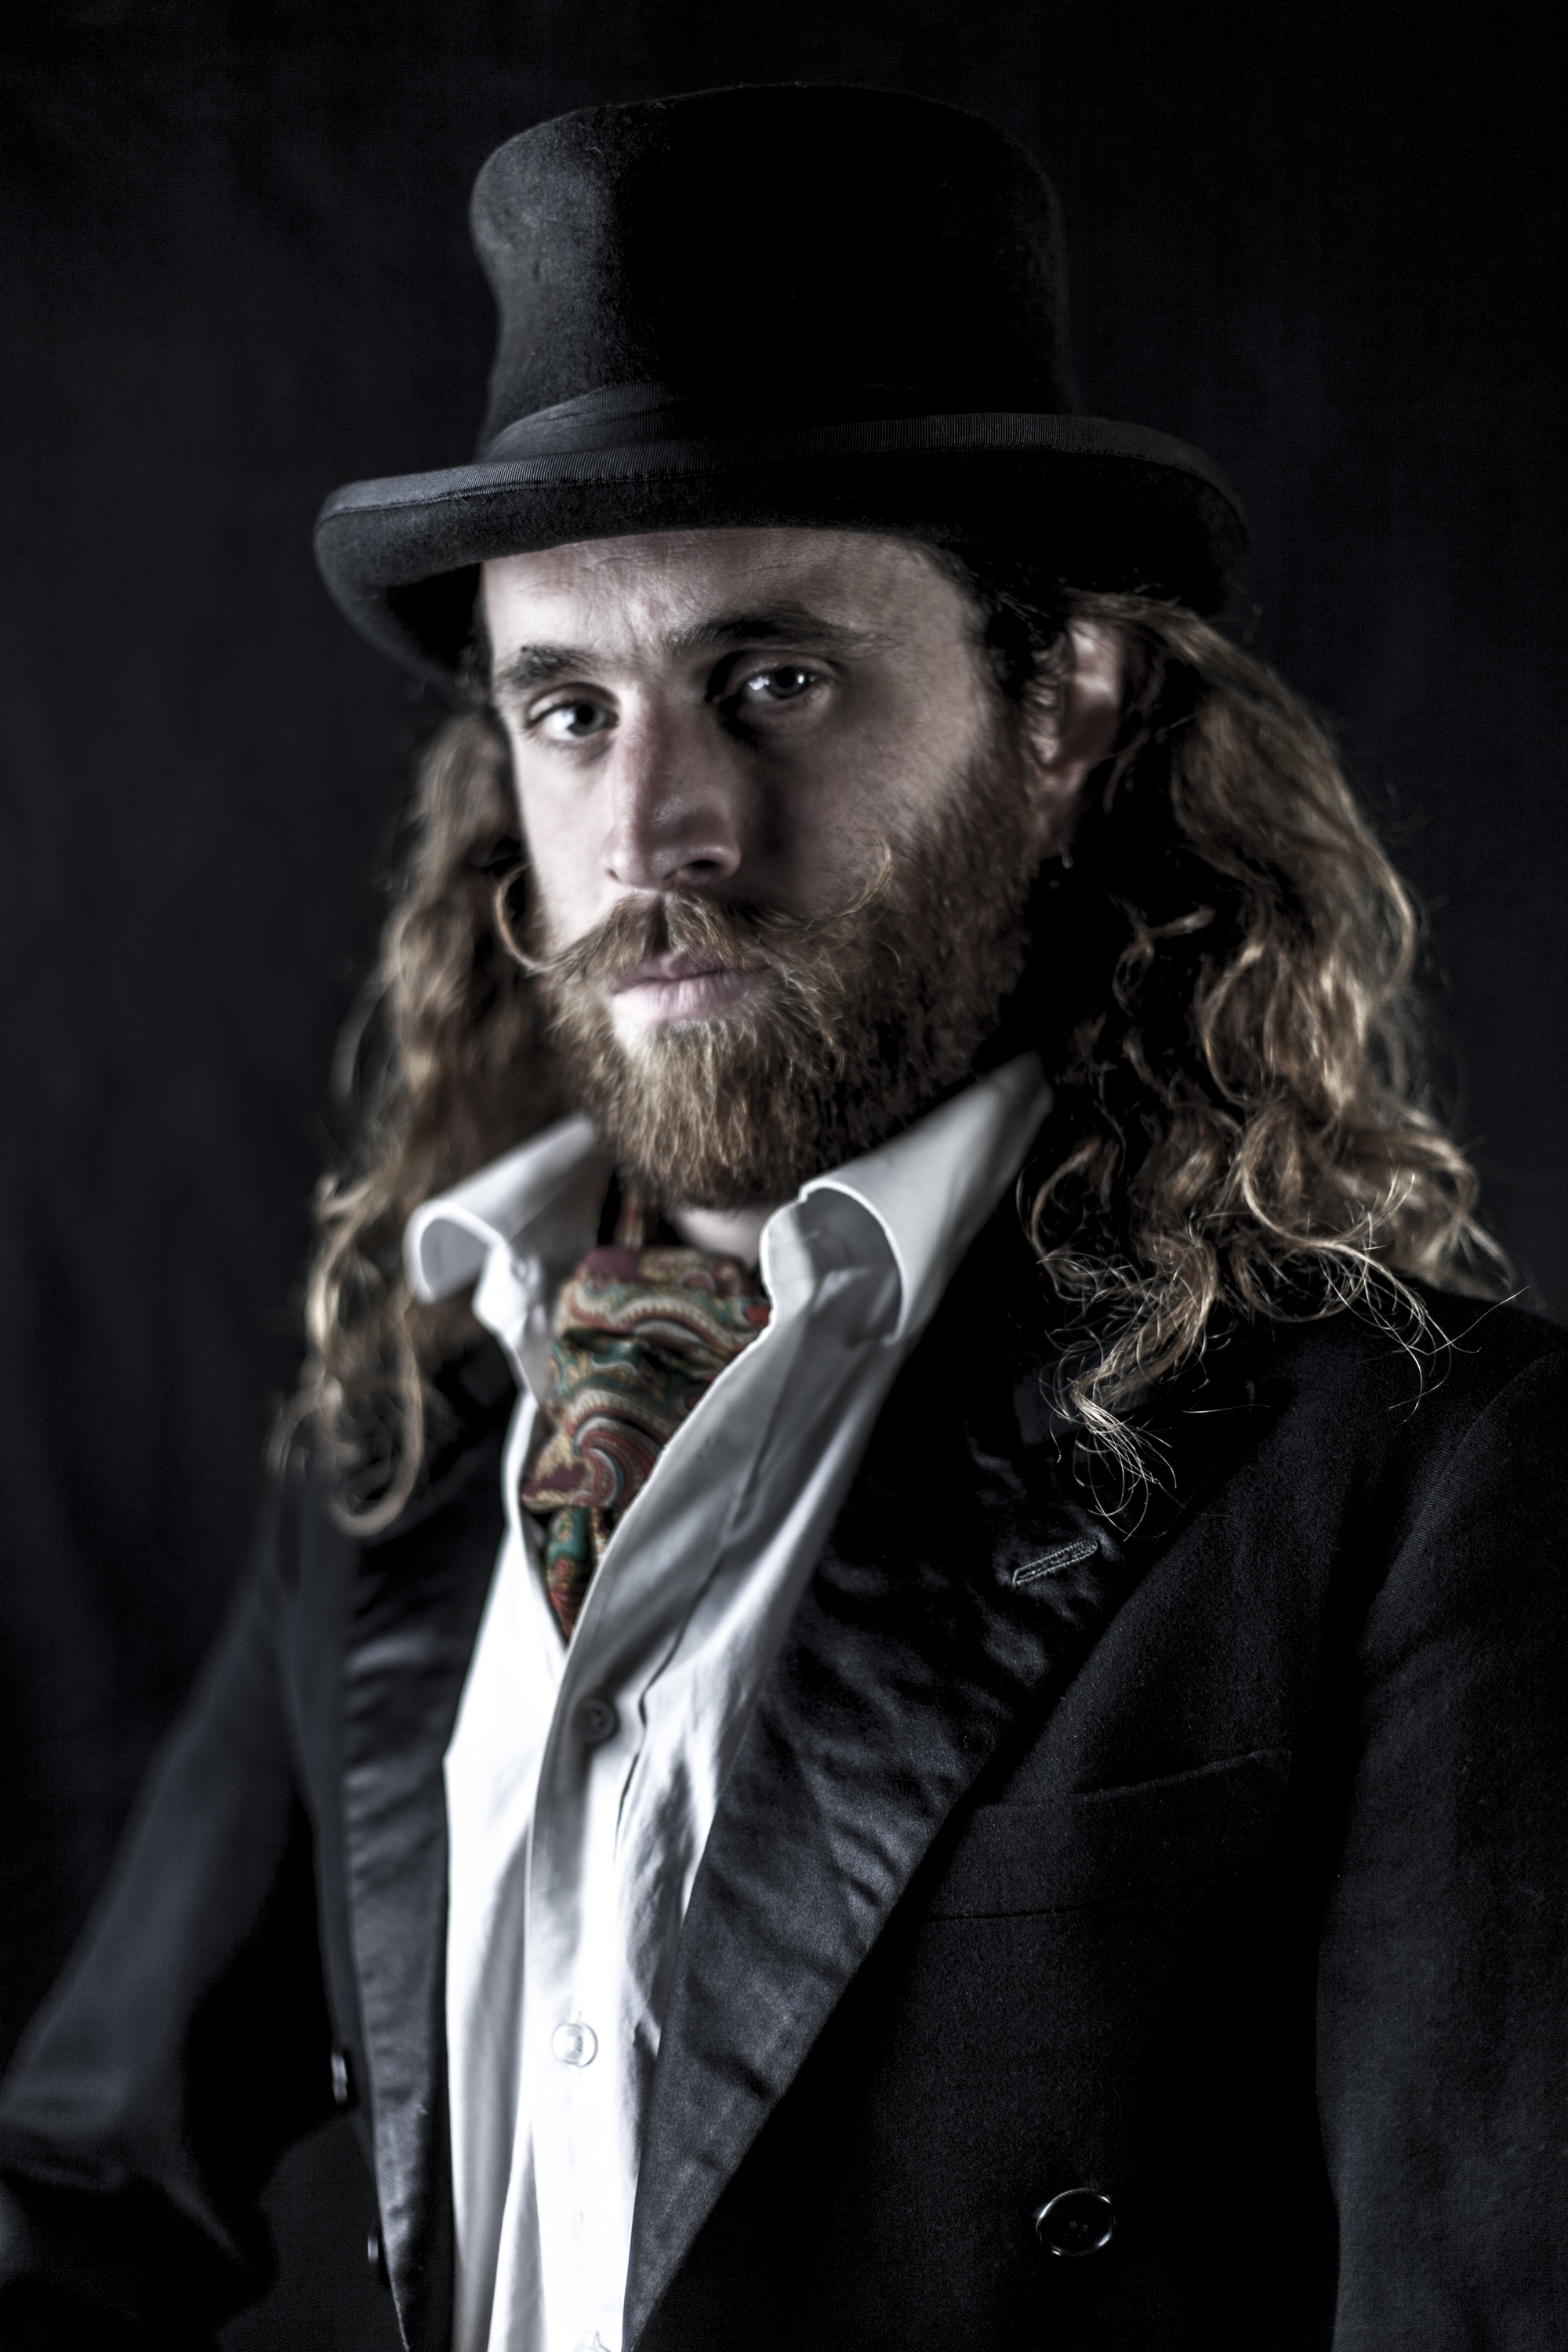 "David Brunetti; portrait photography; Portraiture; editorial portrait; editorial photography; studio photography; circus arts; clowns; performer; entertainer; flying seagull"